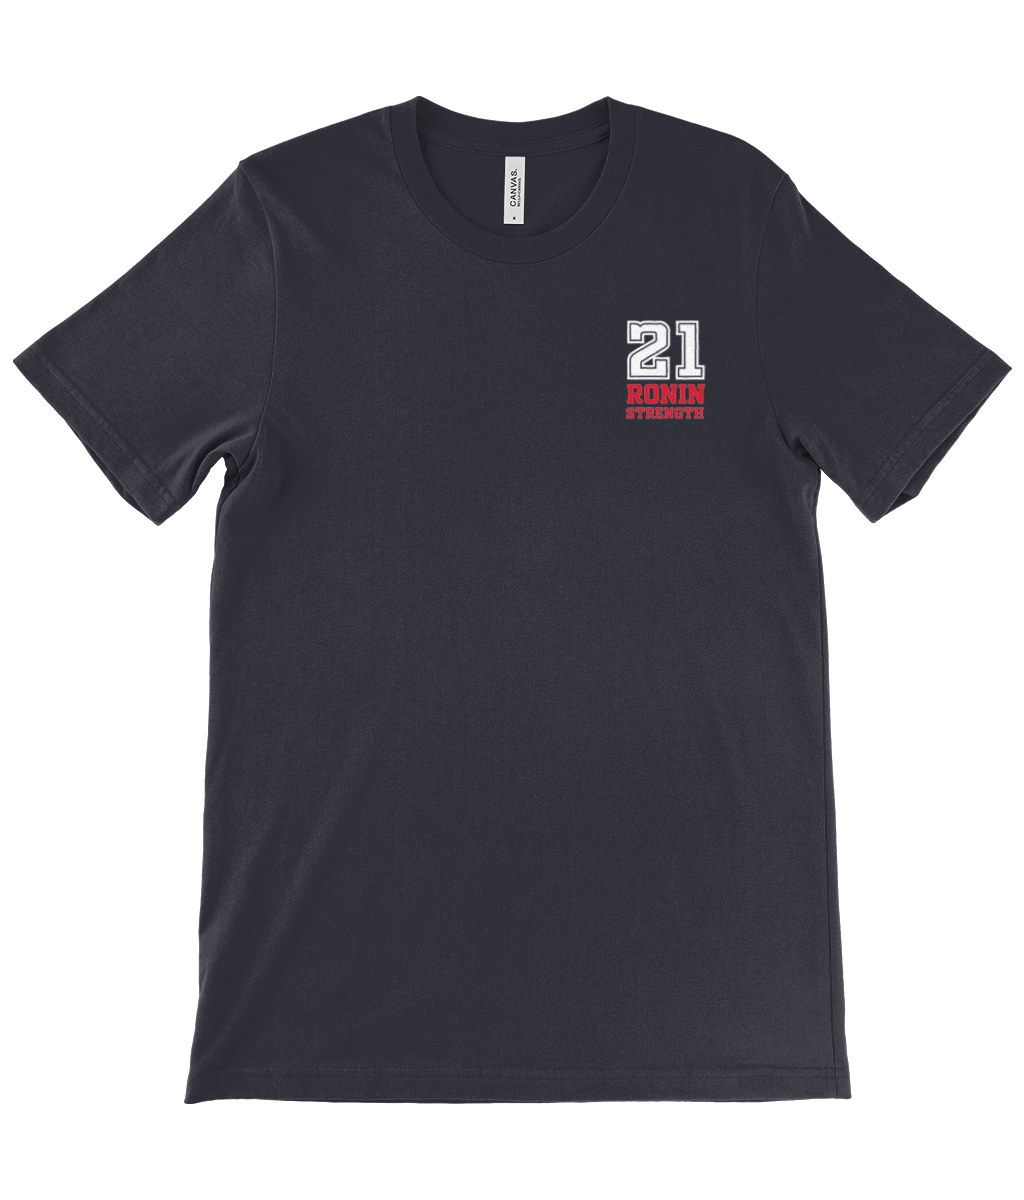 The 21st Law Tee